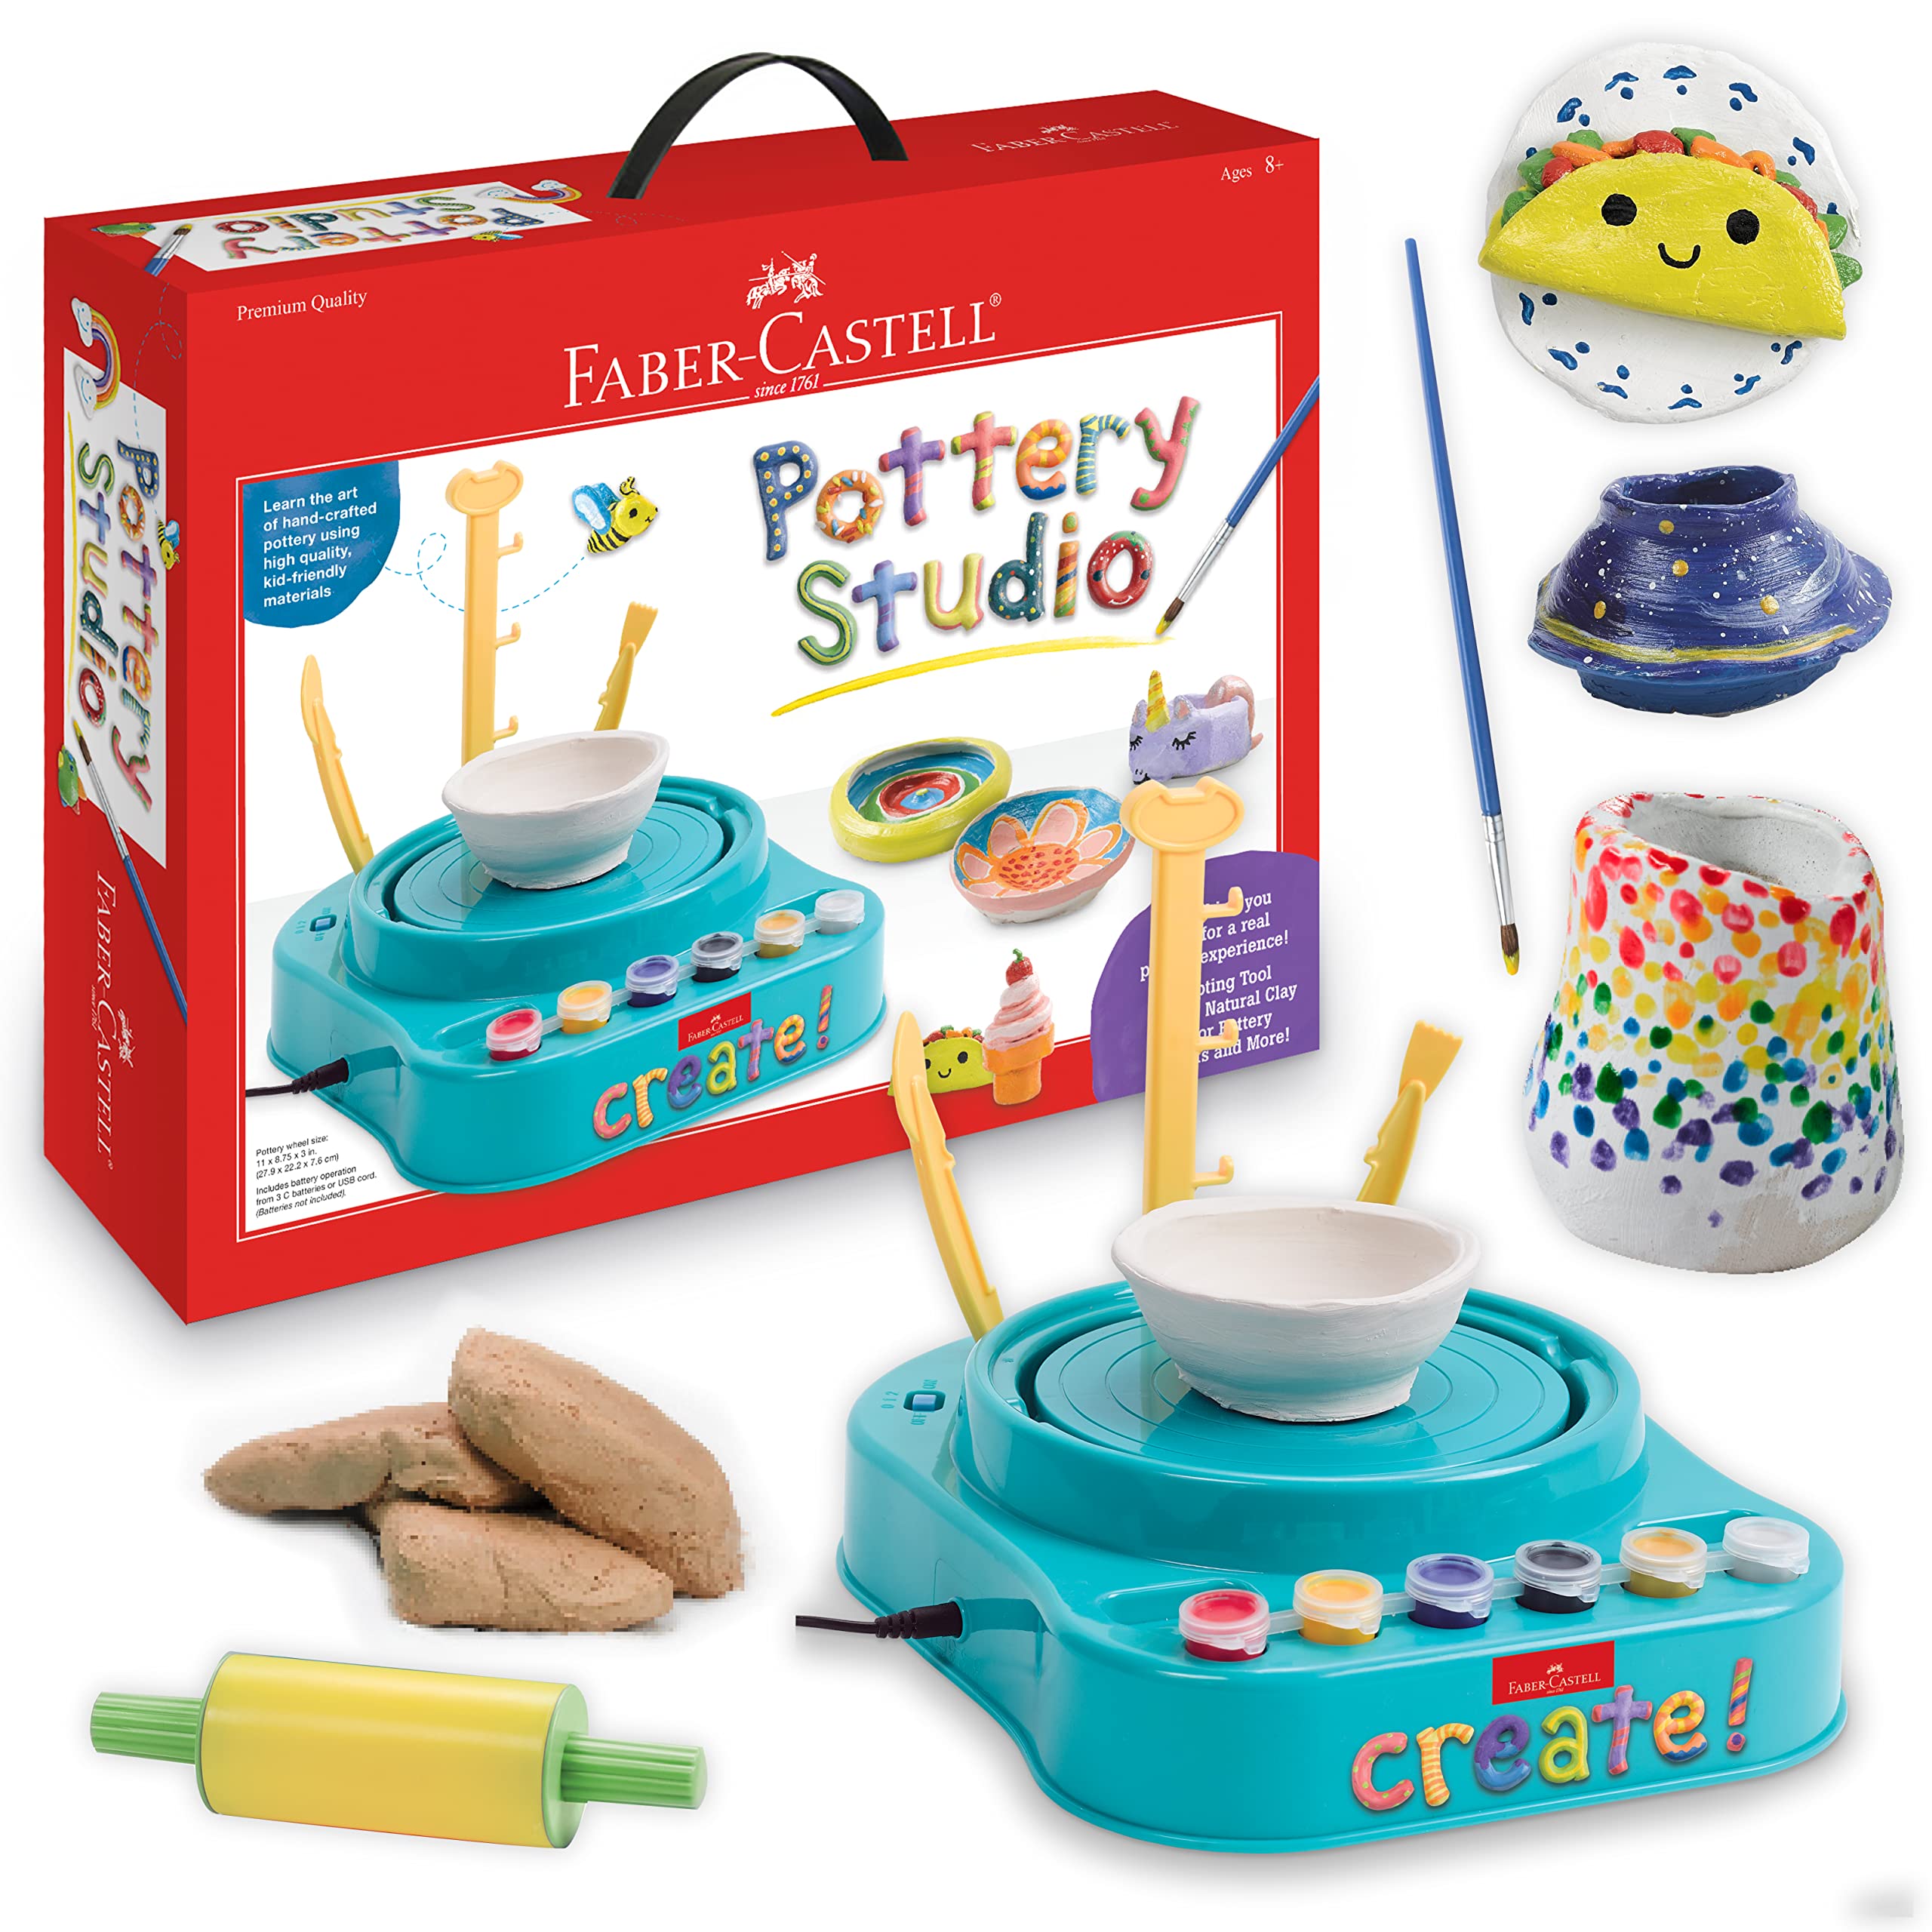 kids pottery wheel products for sale